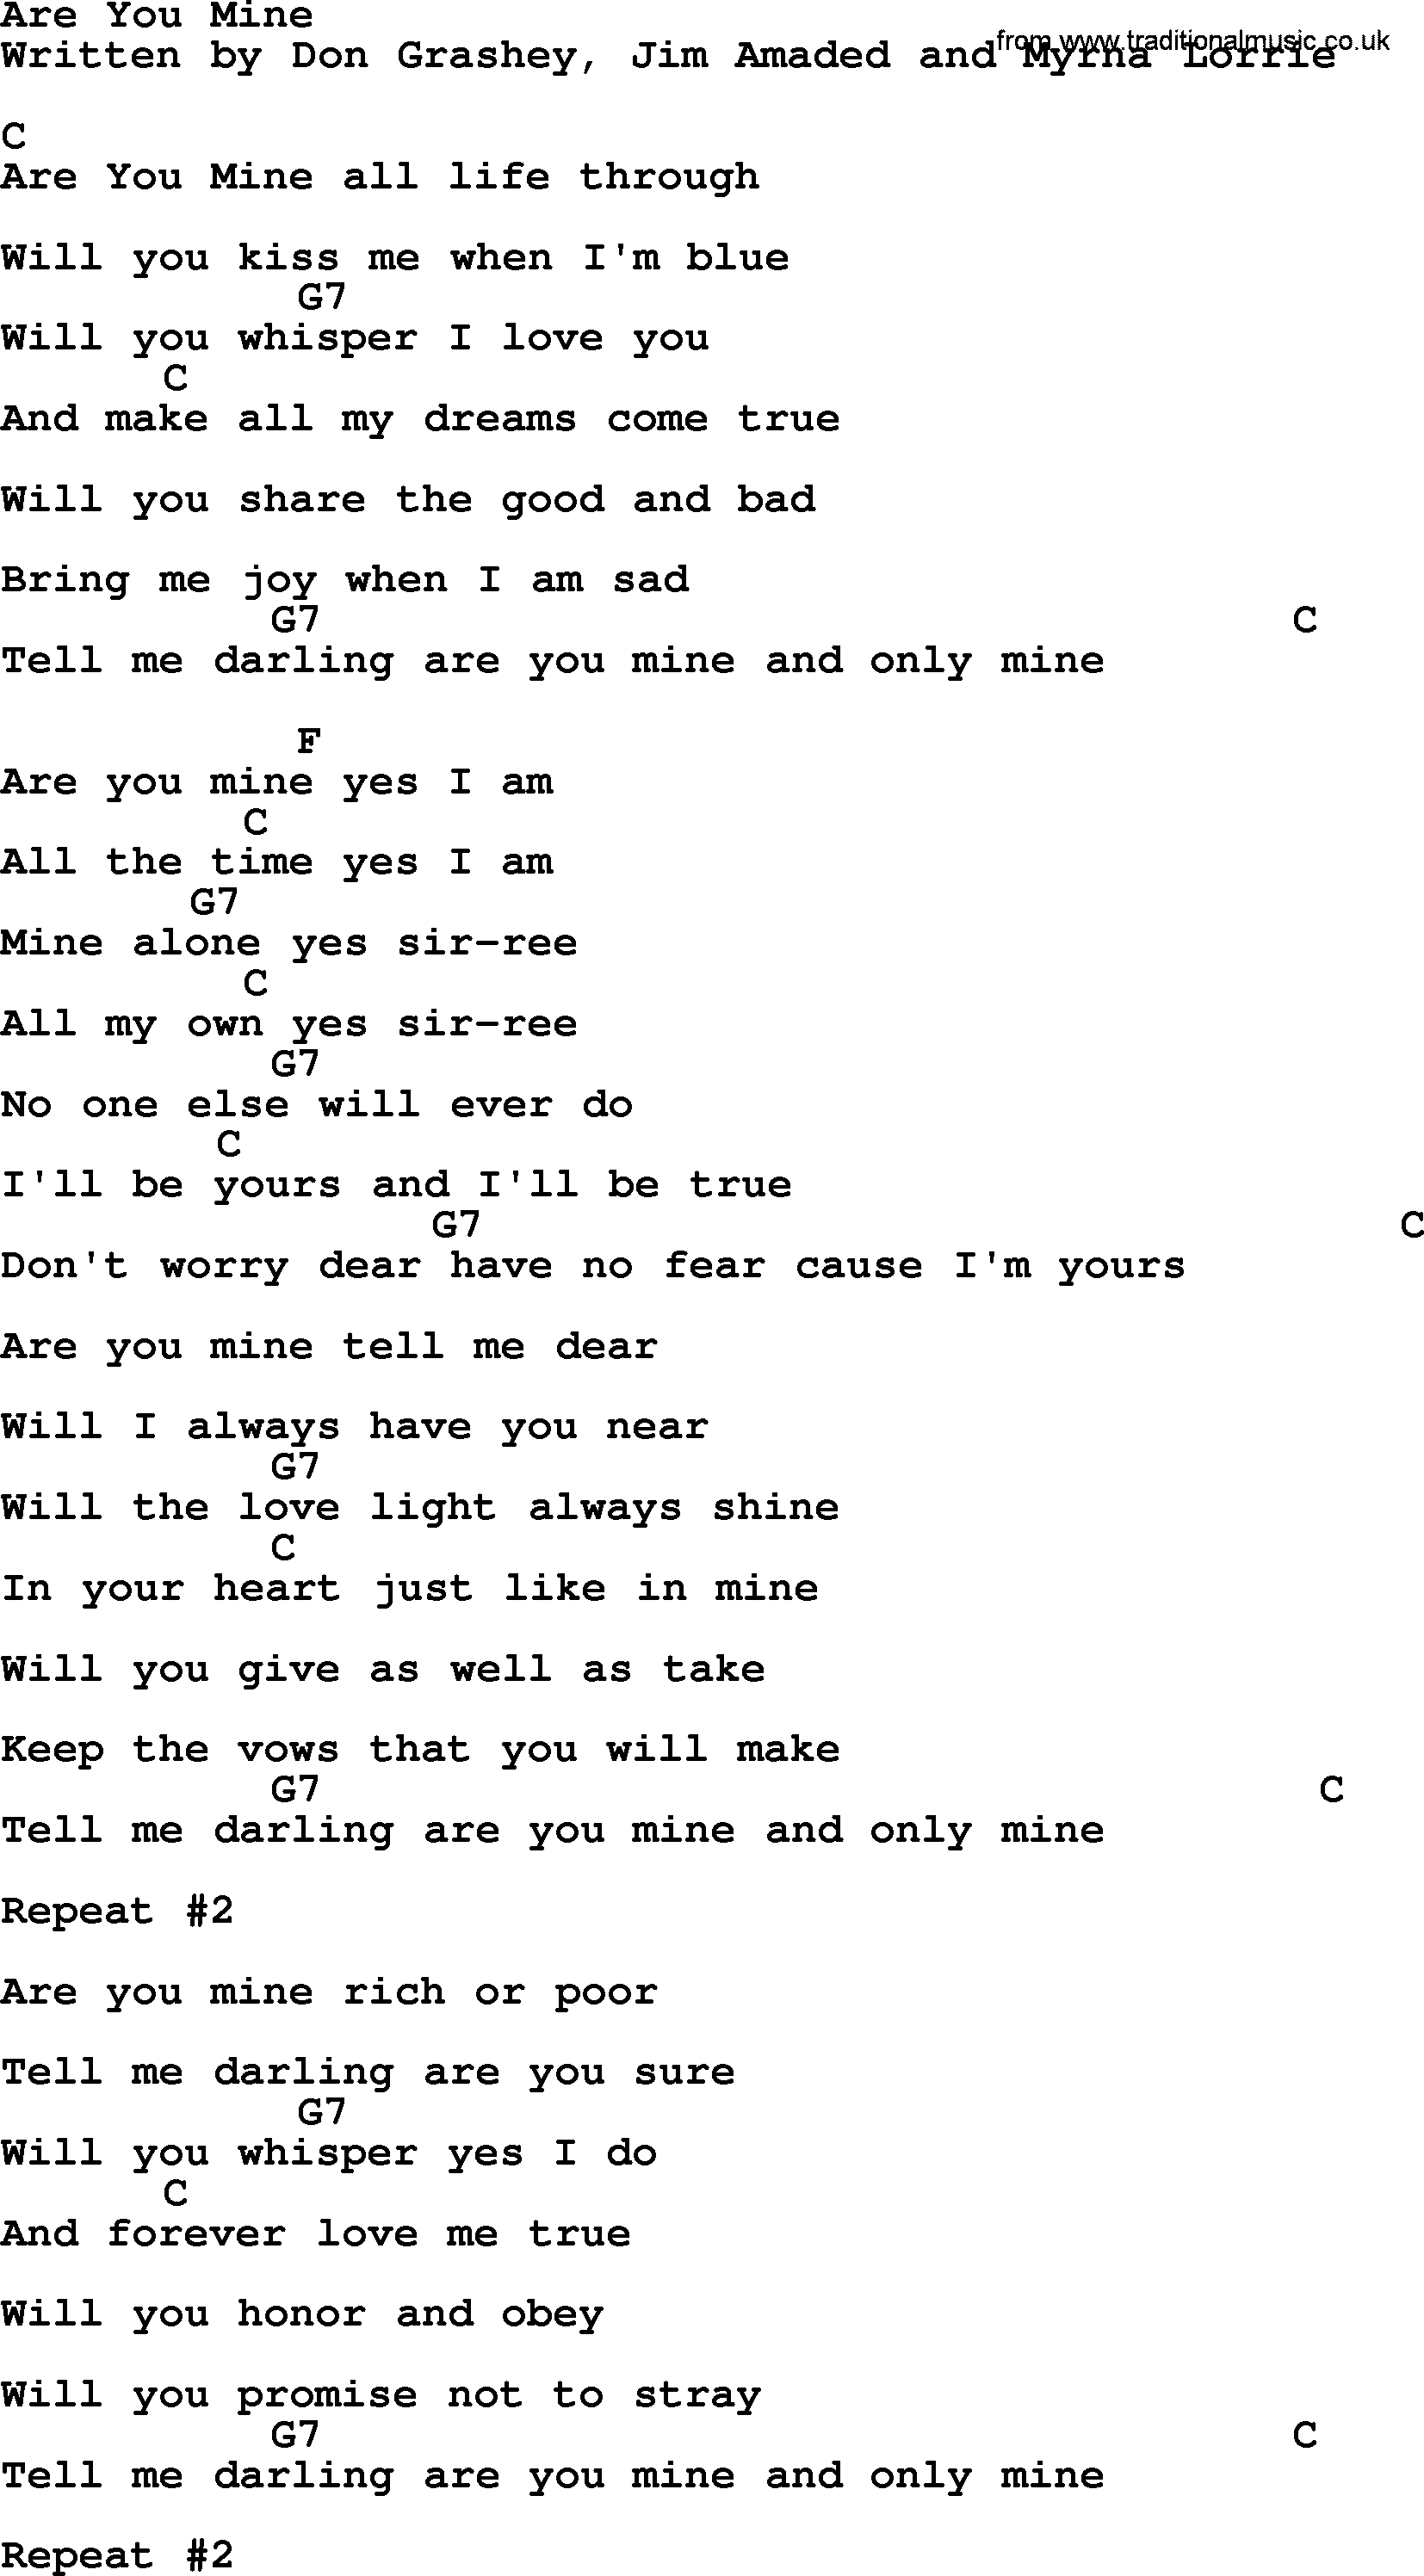 Bluegrass song: Are You Mine, lyrics and chords